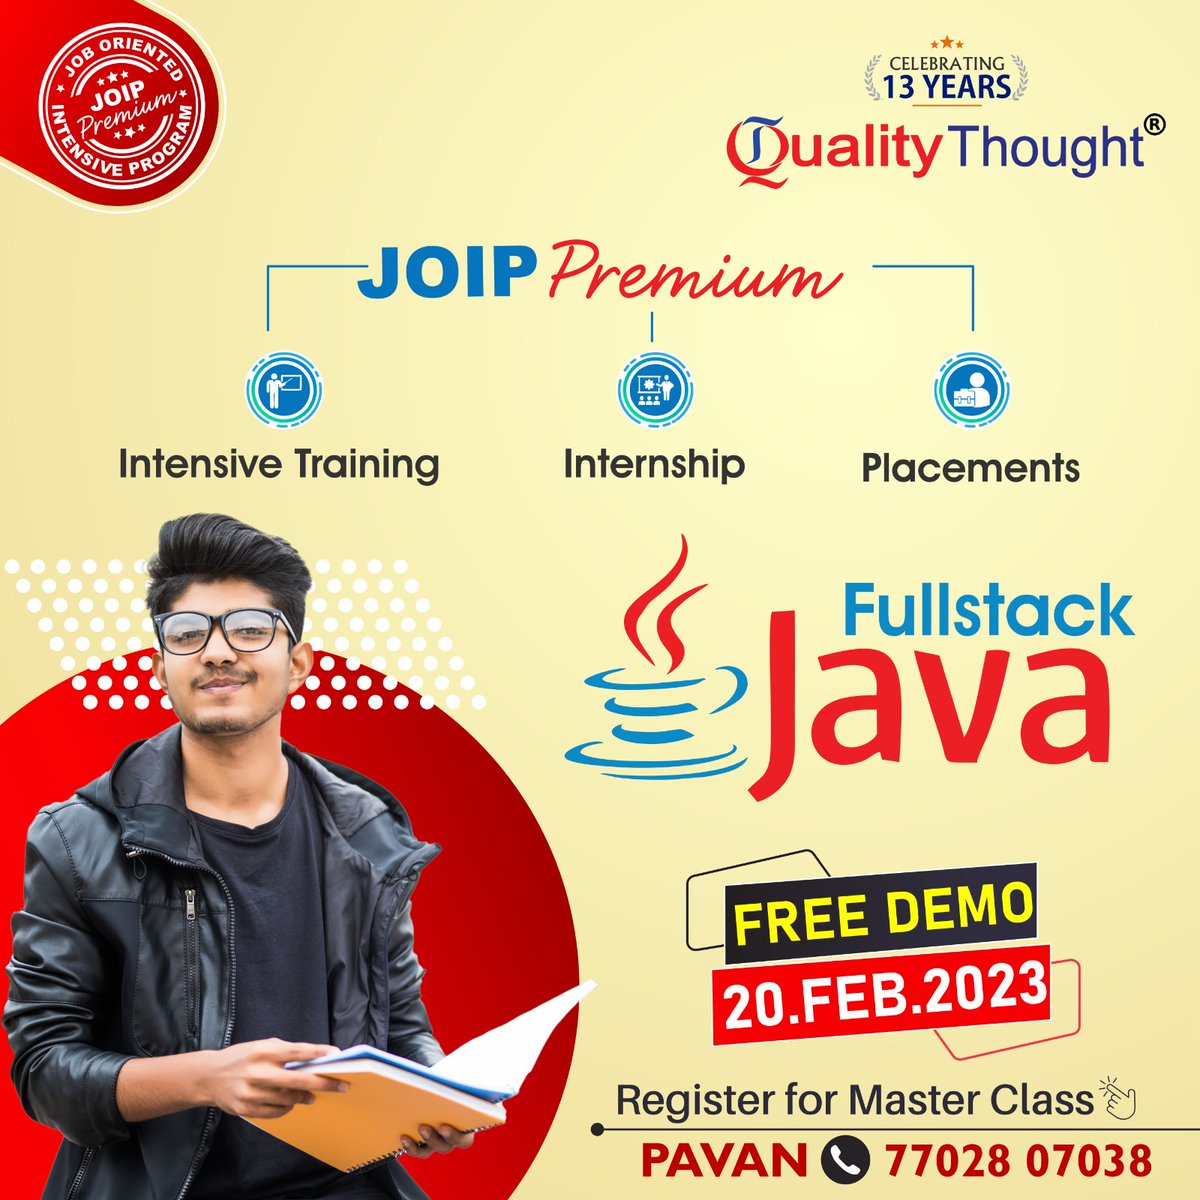 Join our Job oriented intensive program Premium and Internship program with placements in Full-stack Java.
Attend Live Demo on 20th Feb 2023

🌐Register for the Course: qualitythought.in/registernow
📲 contact: 77028 07038 (Pavan)

#java #fullstackjava #javadeveloper